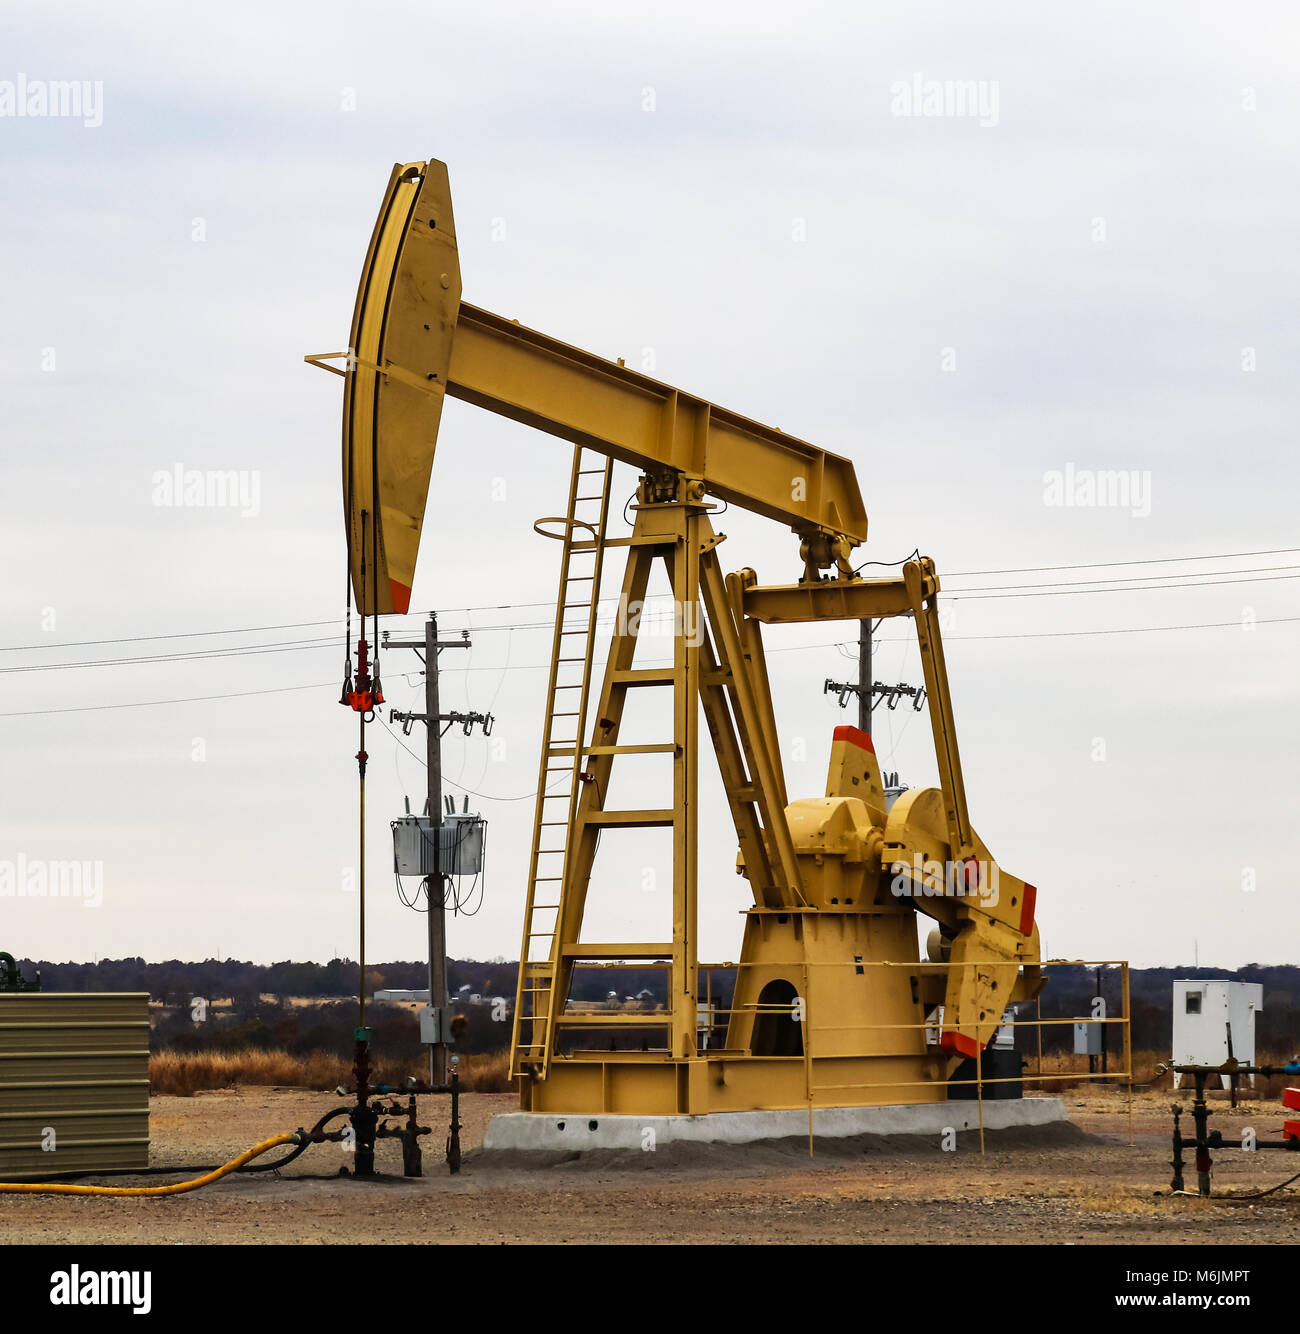 Large Yellow 912 Pump Jack on oil or gas well with surrounding equipment against an overcast sky Stock Photo